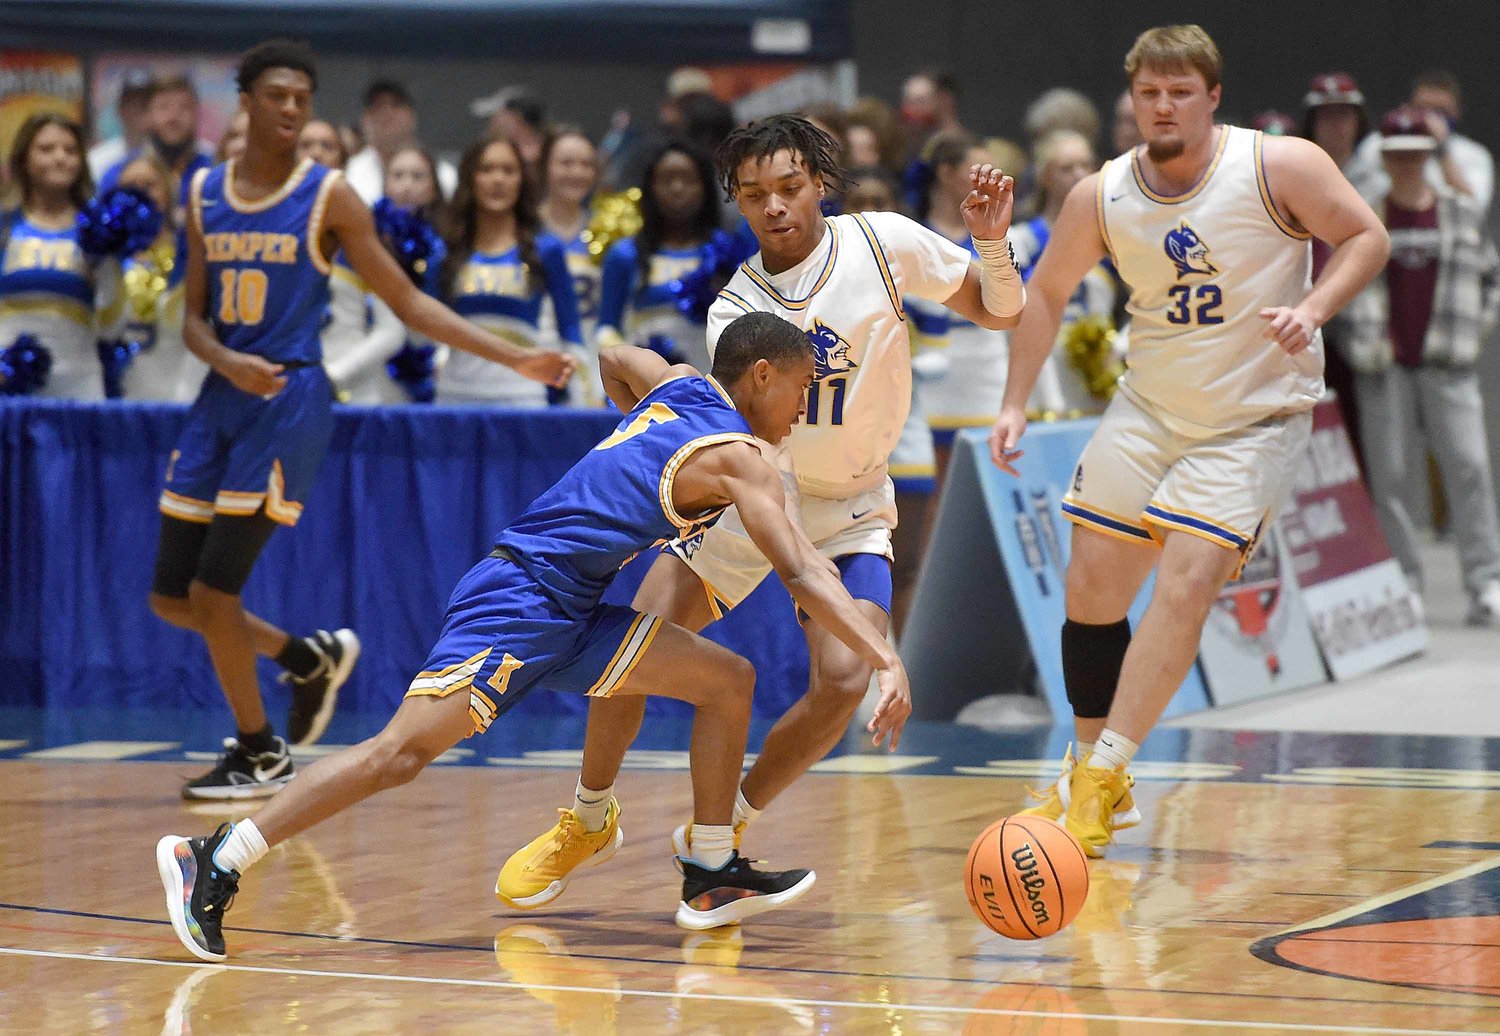 Kemper County's Alfred Love (5) drives against Booneville's L.J. Shumpert at the MHSAA State Basketball Tournament  semifinals on Wednesday, March 3, 2021, at the Mississippi Coliseum in Jackson, Miss.